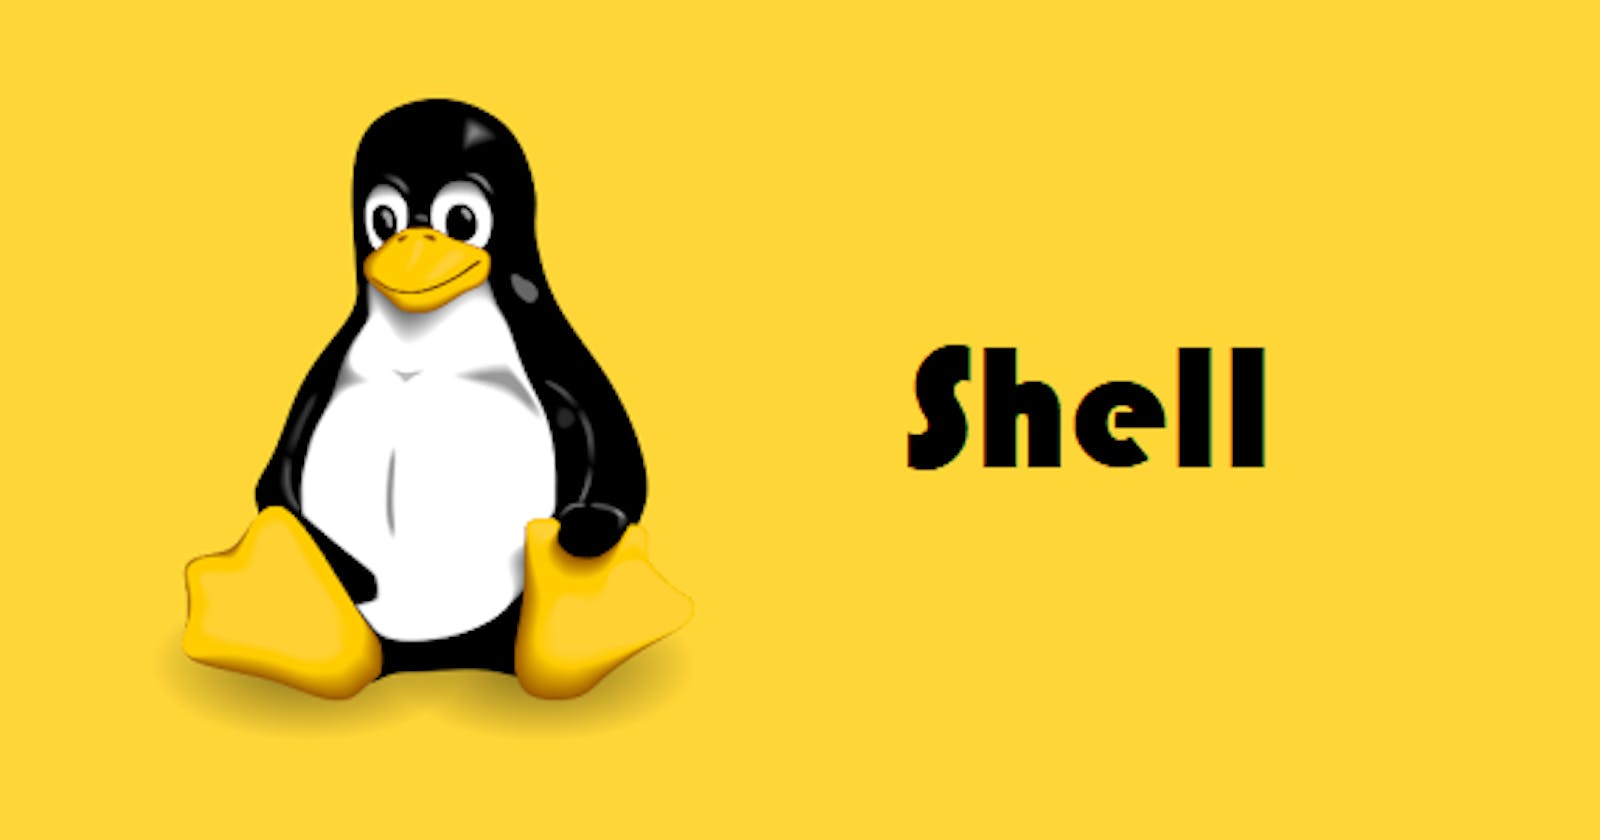 Day 5 - Advance Linux Shell Scripting